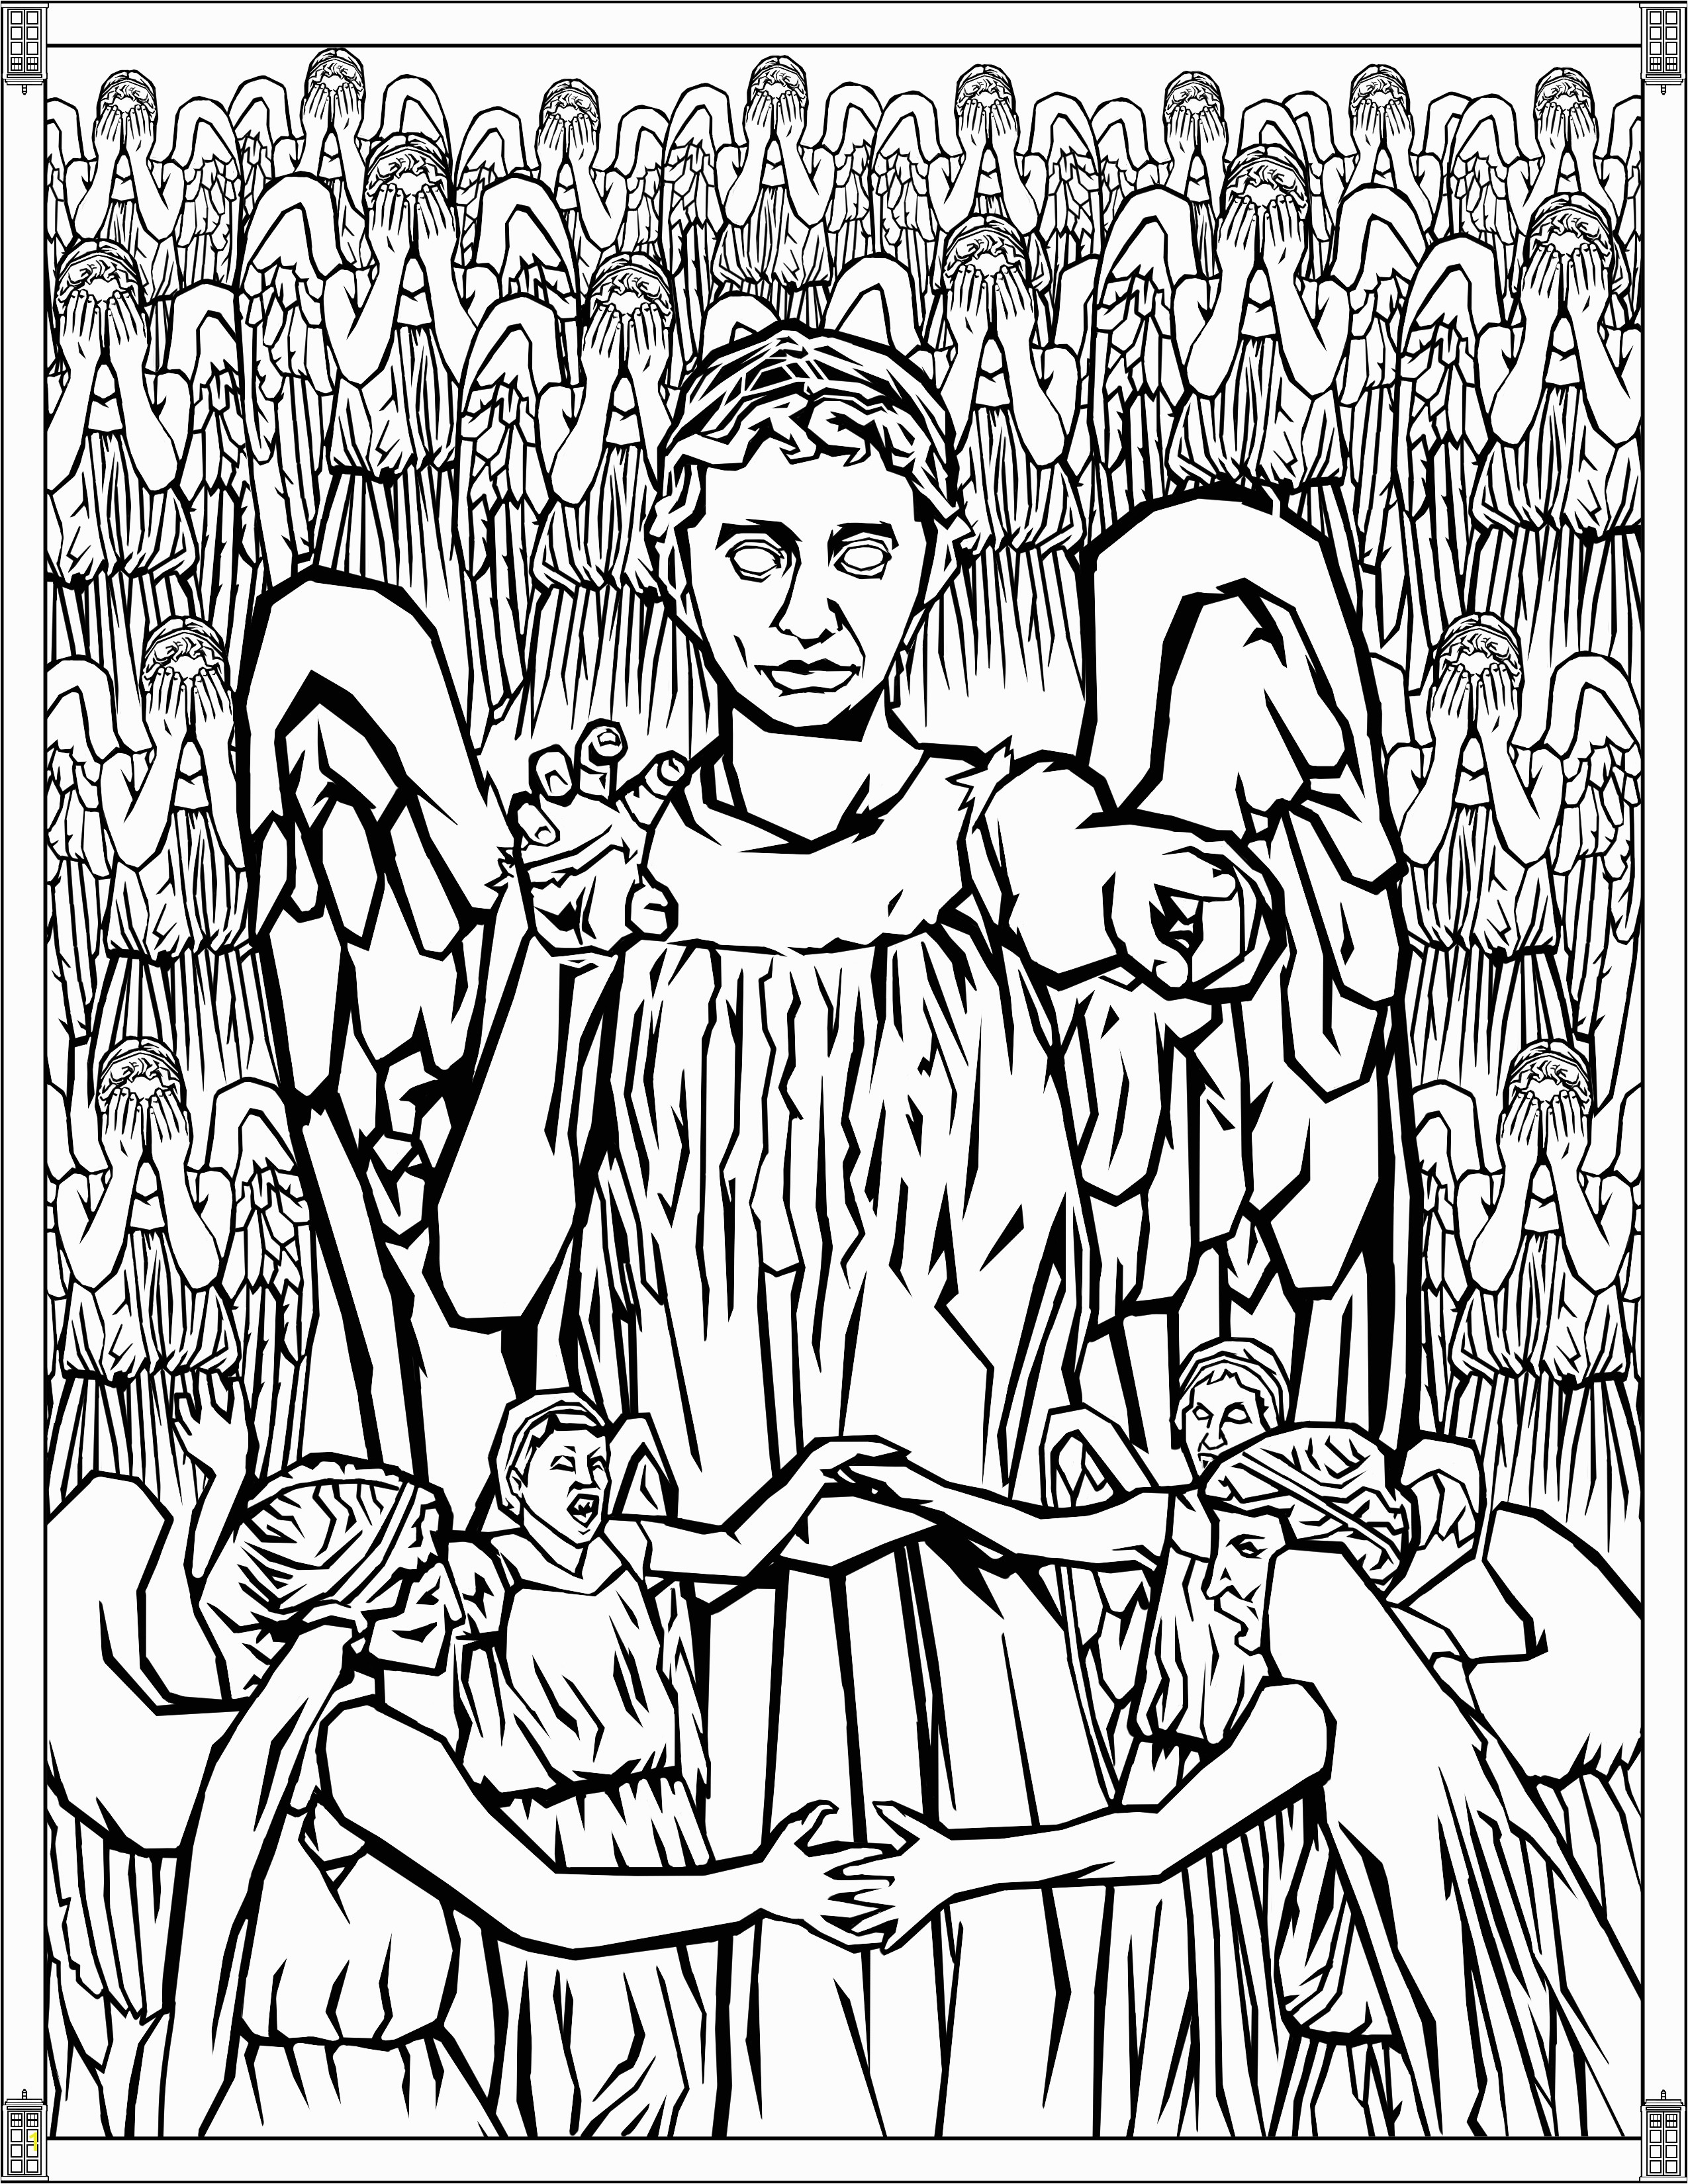 Weeping Angel Coloring Page Doctor who Wibbly Wobbly Timey Wimey Coloring Pages [printables